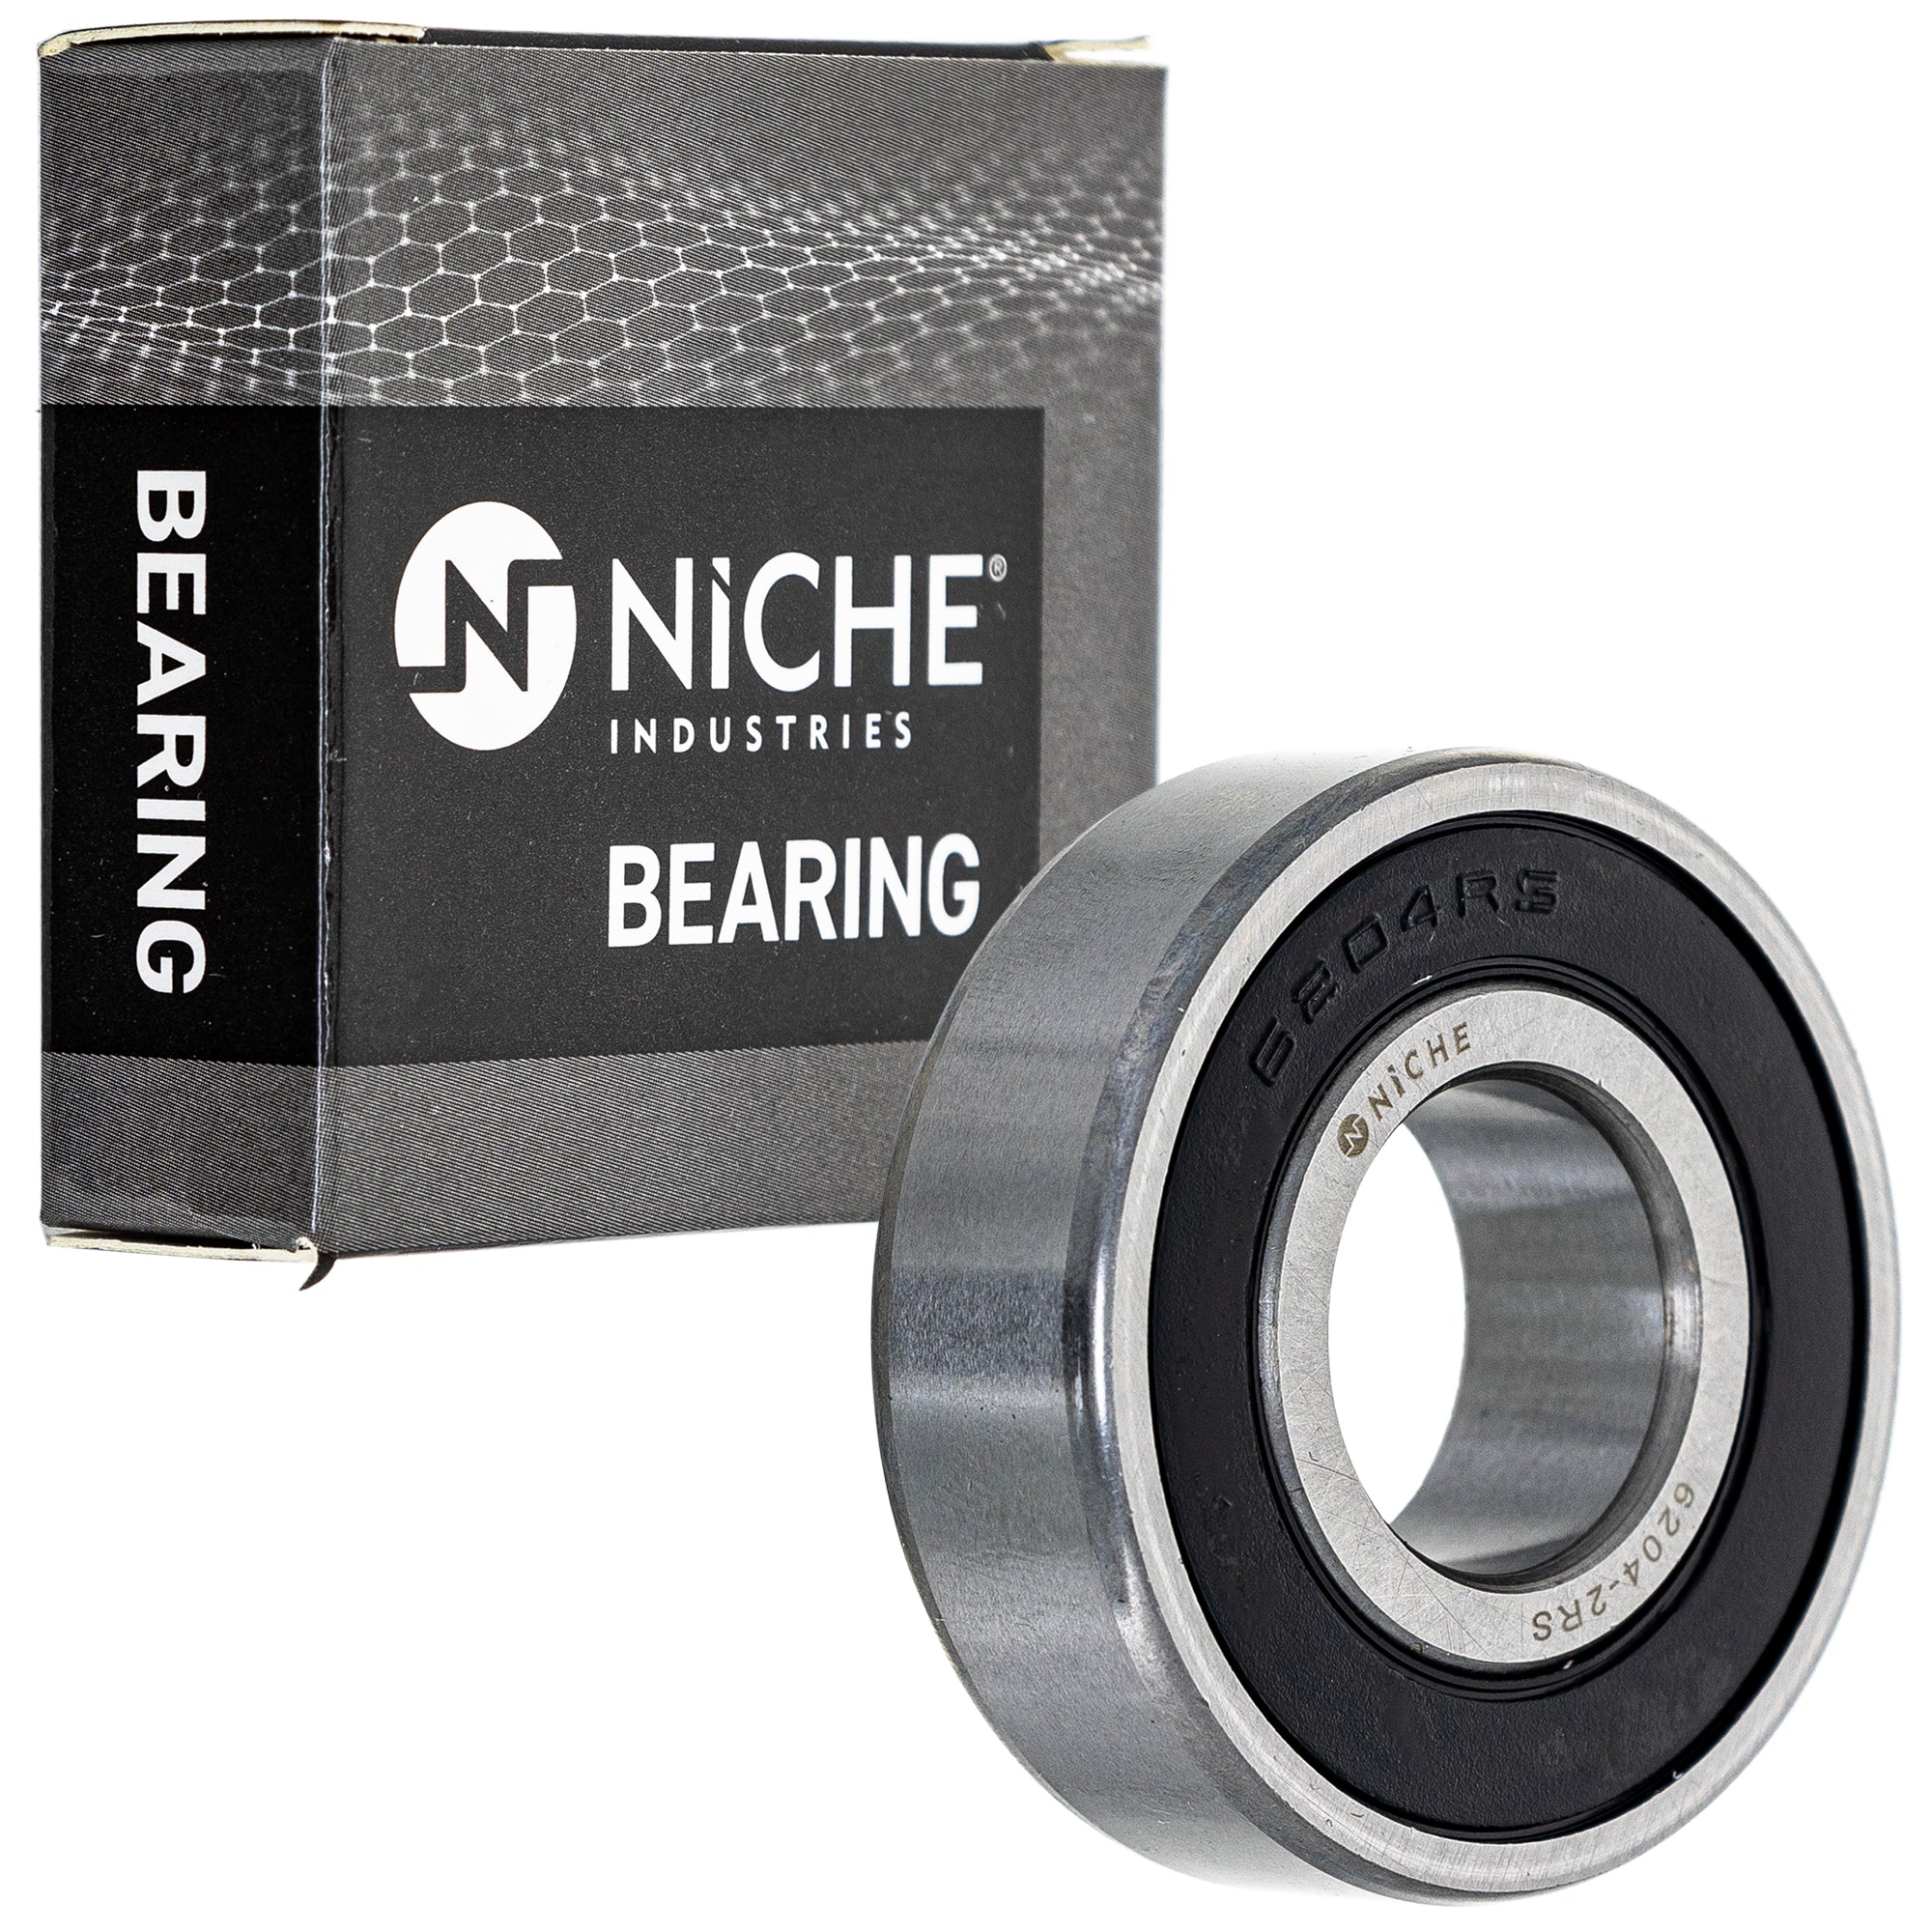 NICHE 519-CBB2229R Bearing & Seal Kit for zOTHER Snapper MURRAY